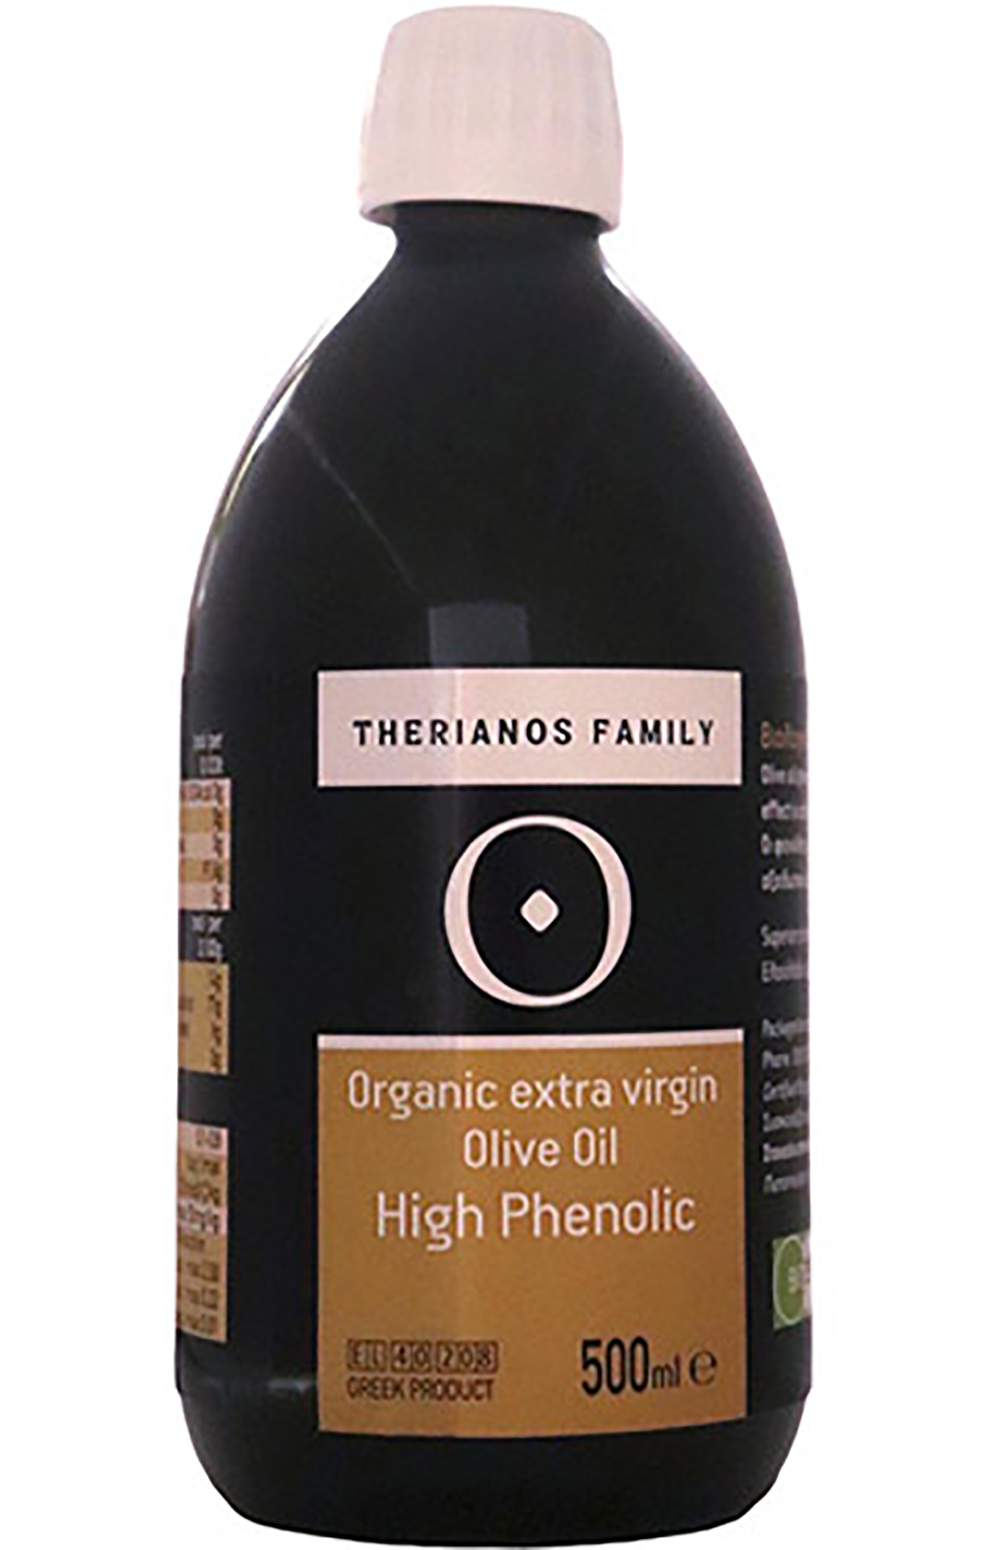 Therianos Family Organic High Phenolic olive oil